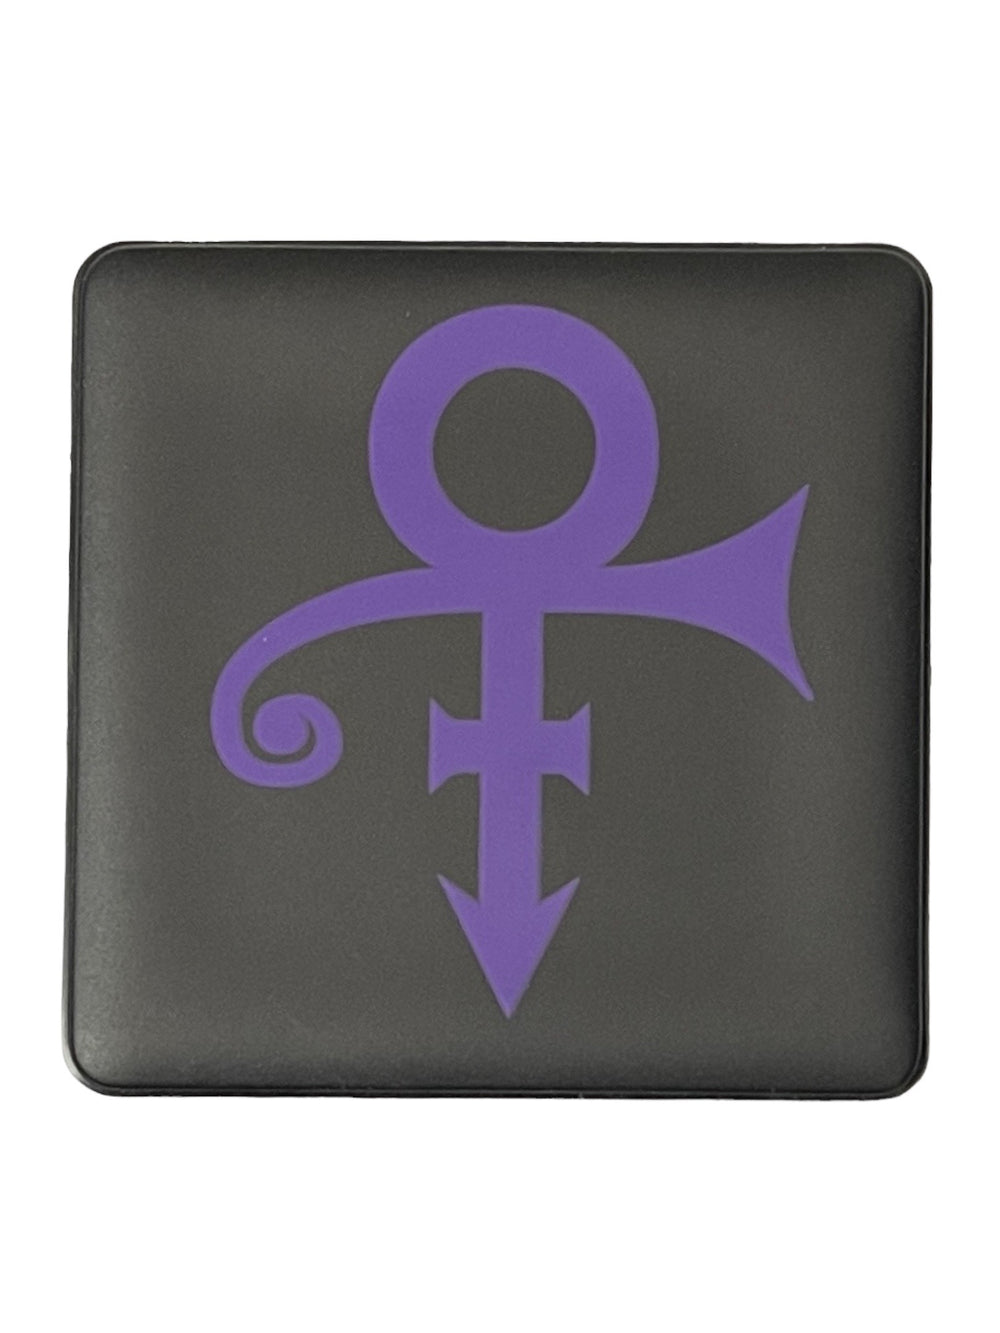 Prince – Official Prince Coaster XCLUSIVE  Limited Edition Love Symbol Design